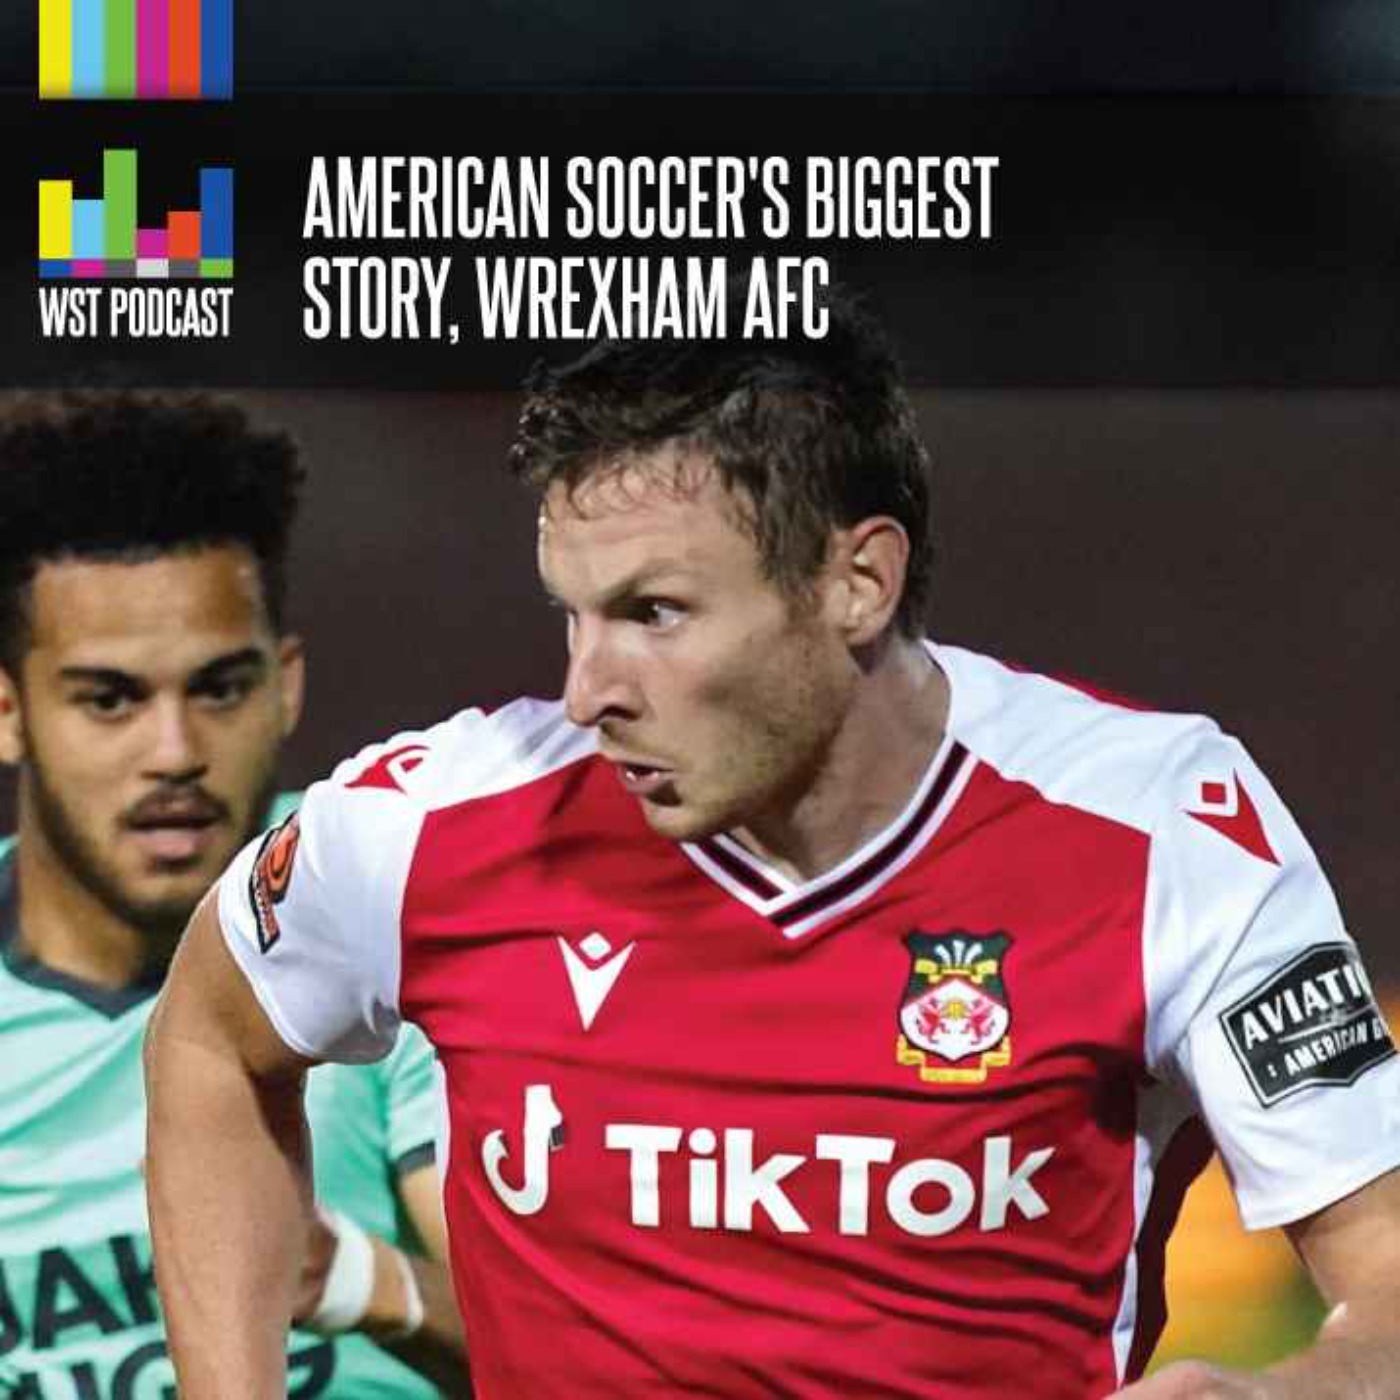 Wrexham is America’s biggest soccer story right now